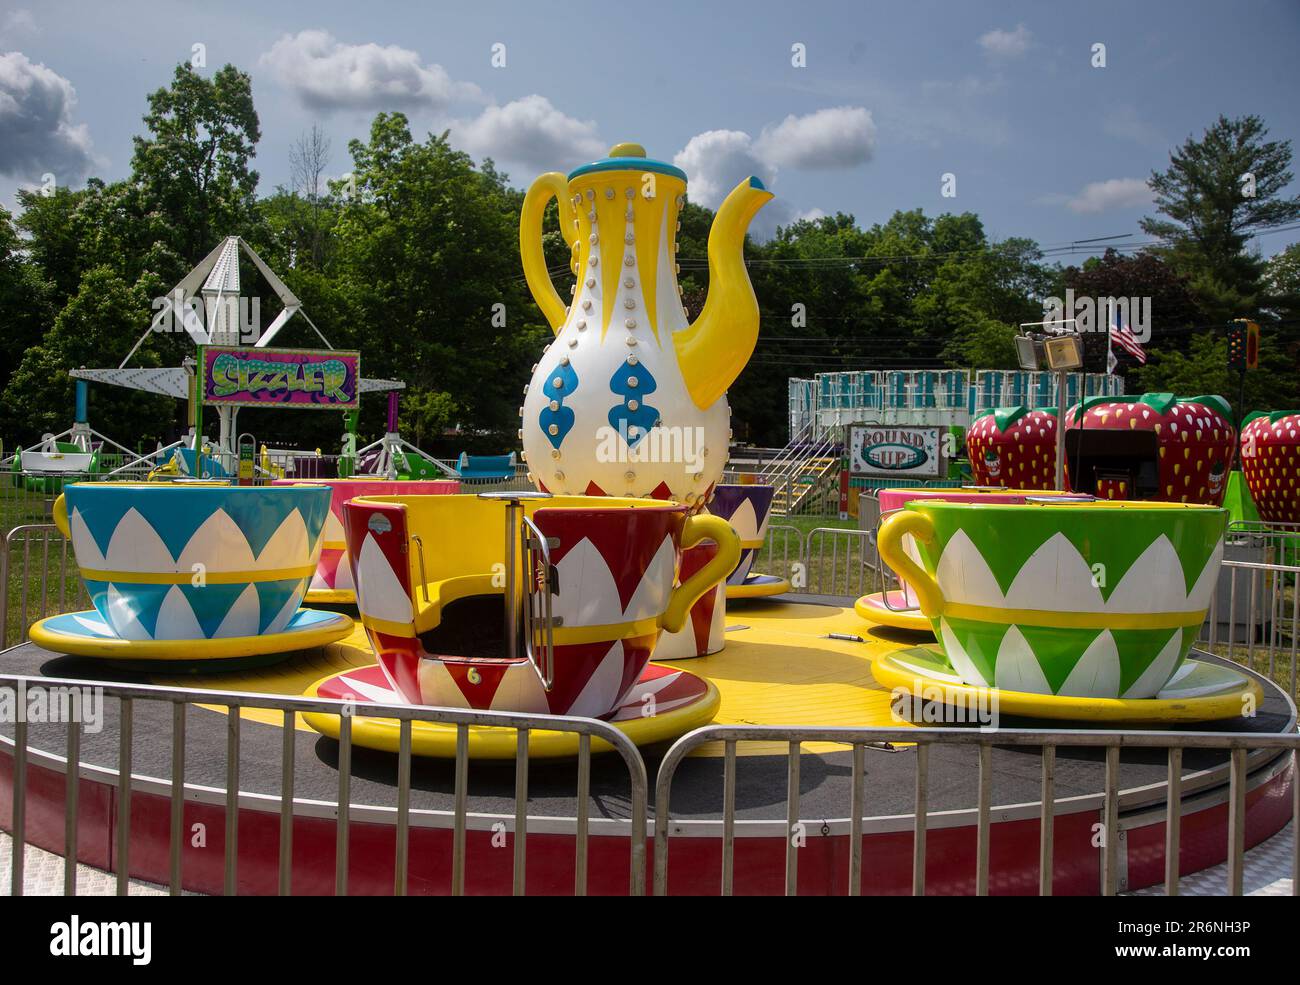 Children's teacup ride at a carnival Stock Photo